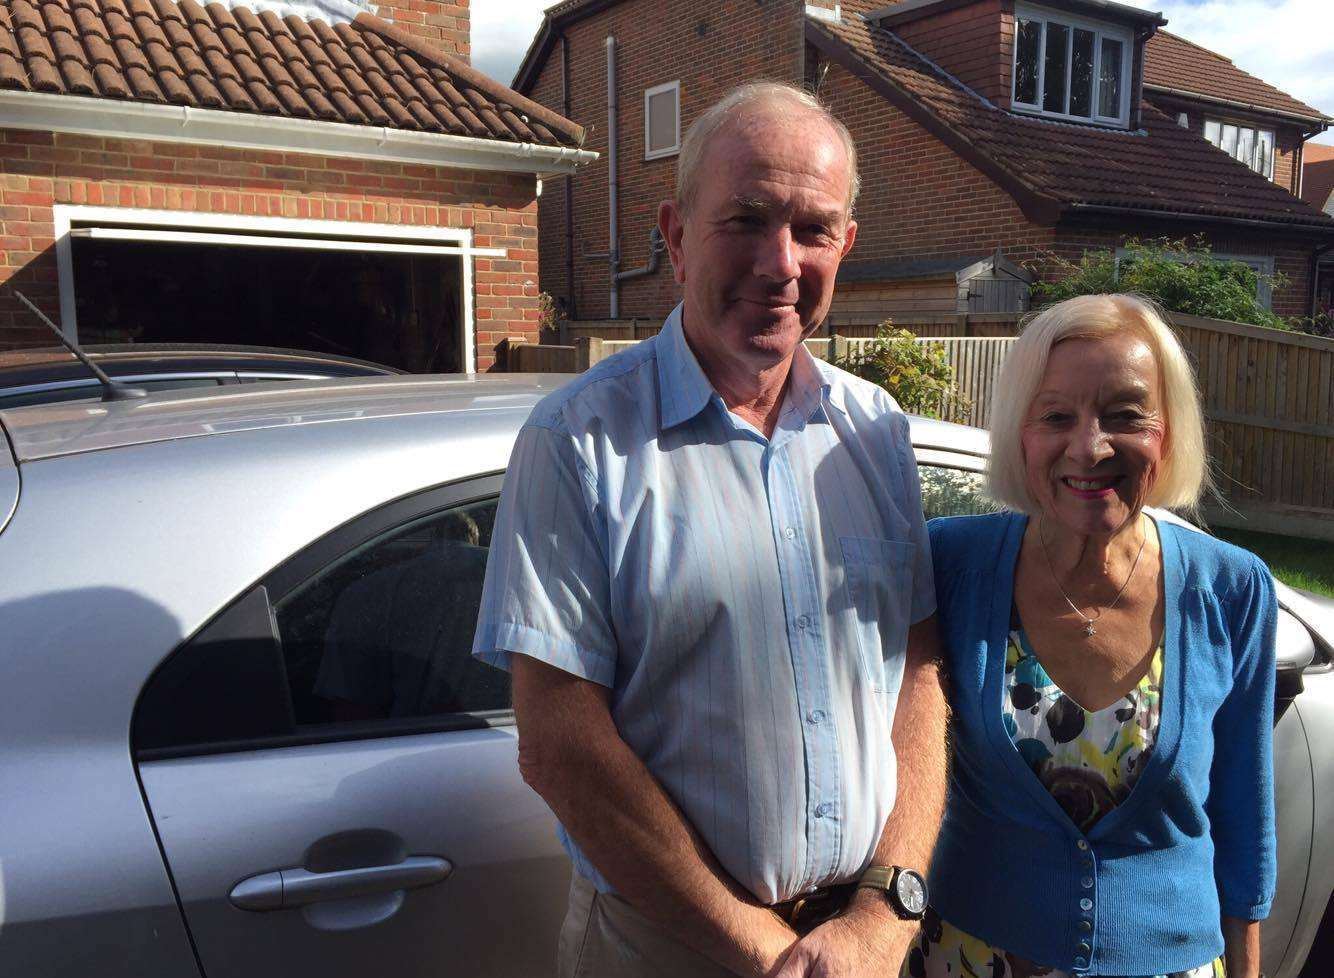 Nigel and Hilary Mitchell were shocked when their car key opened another car